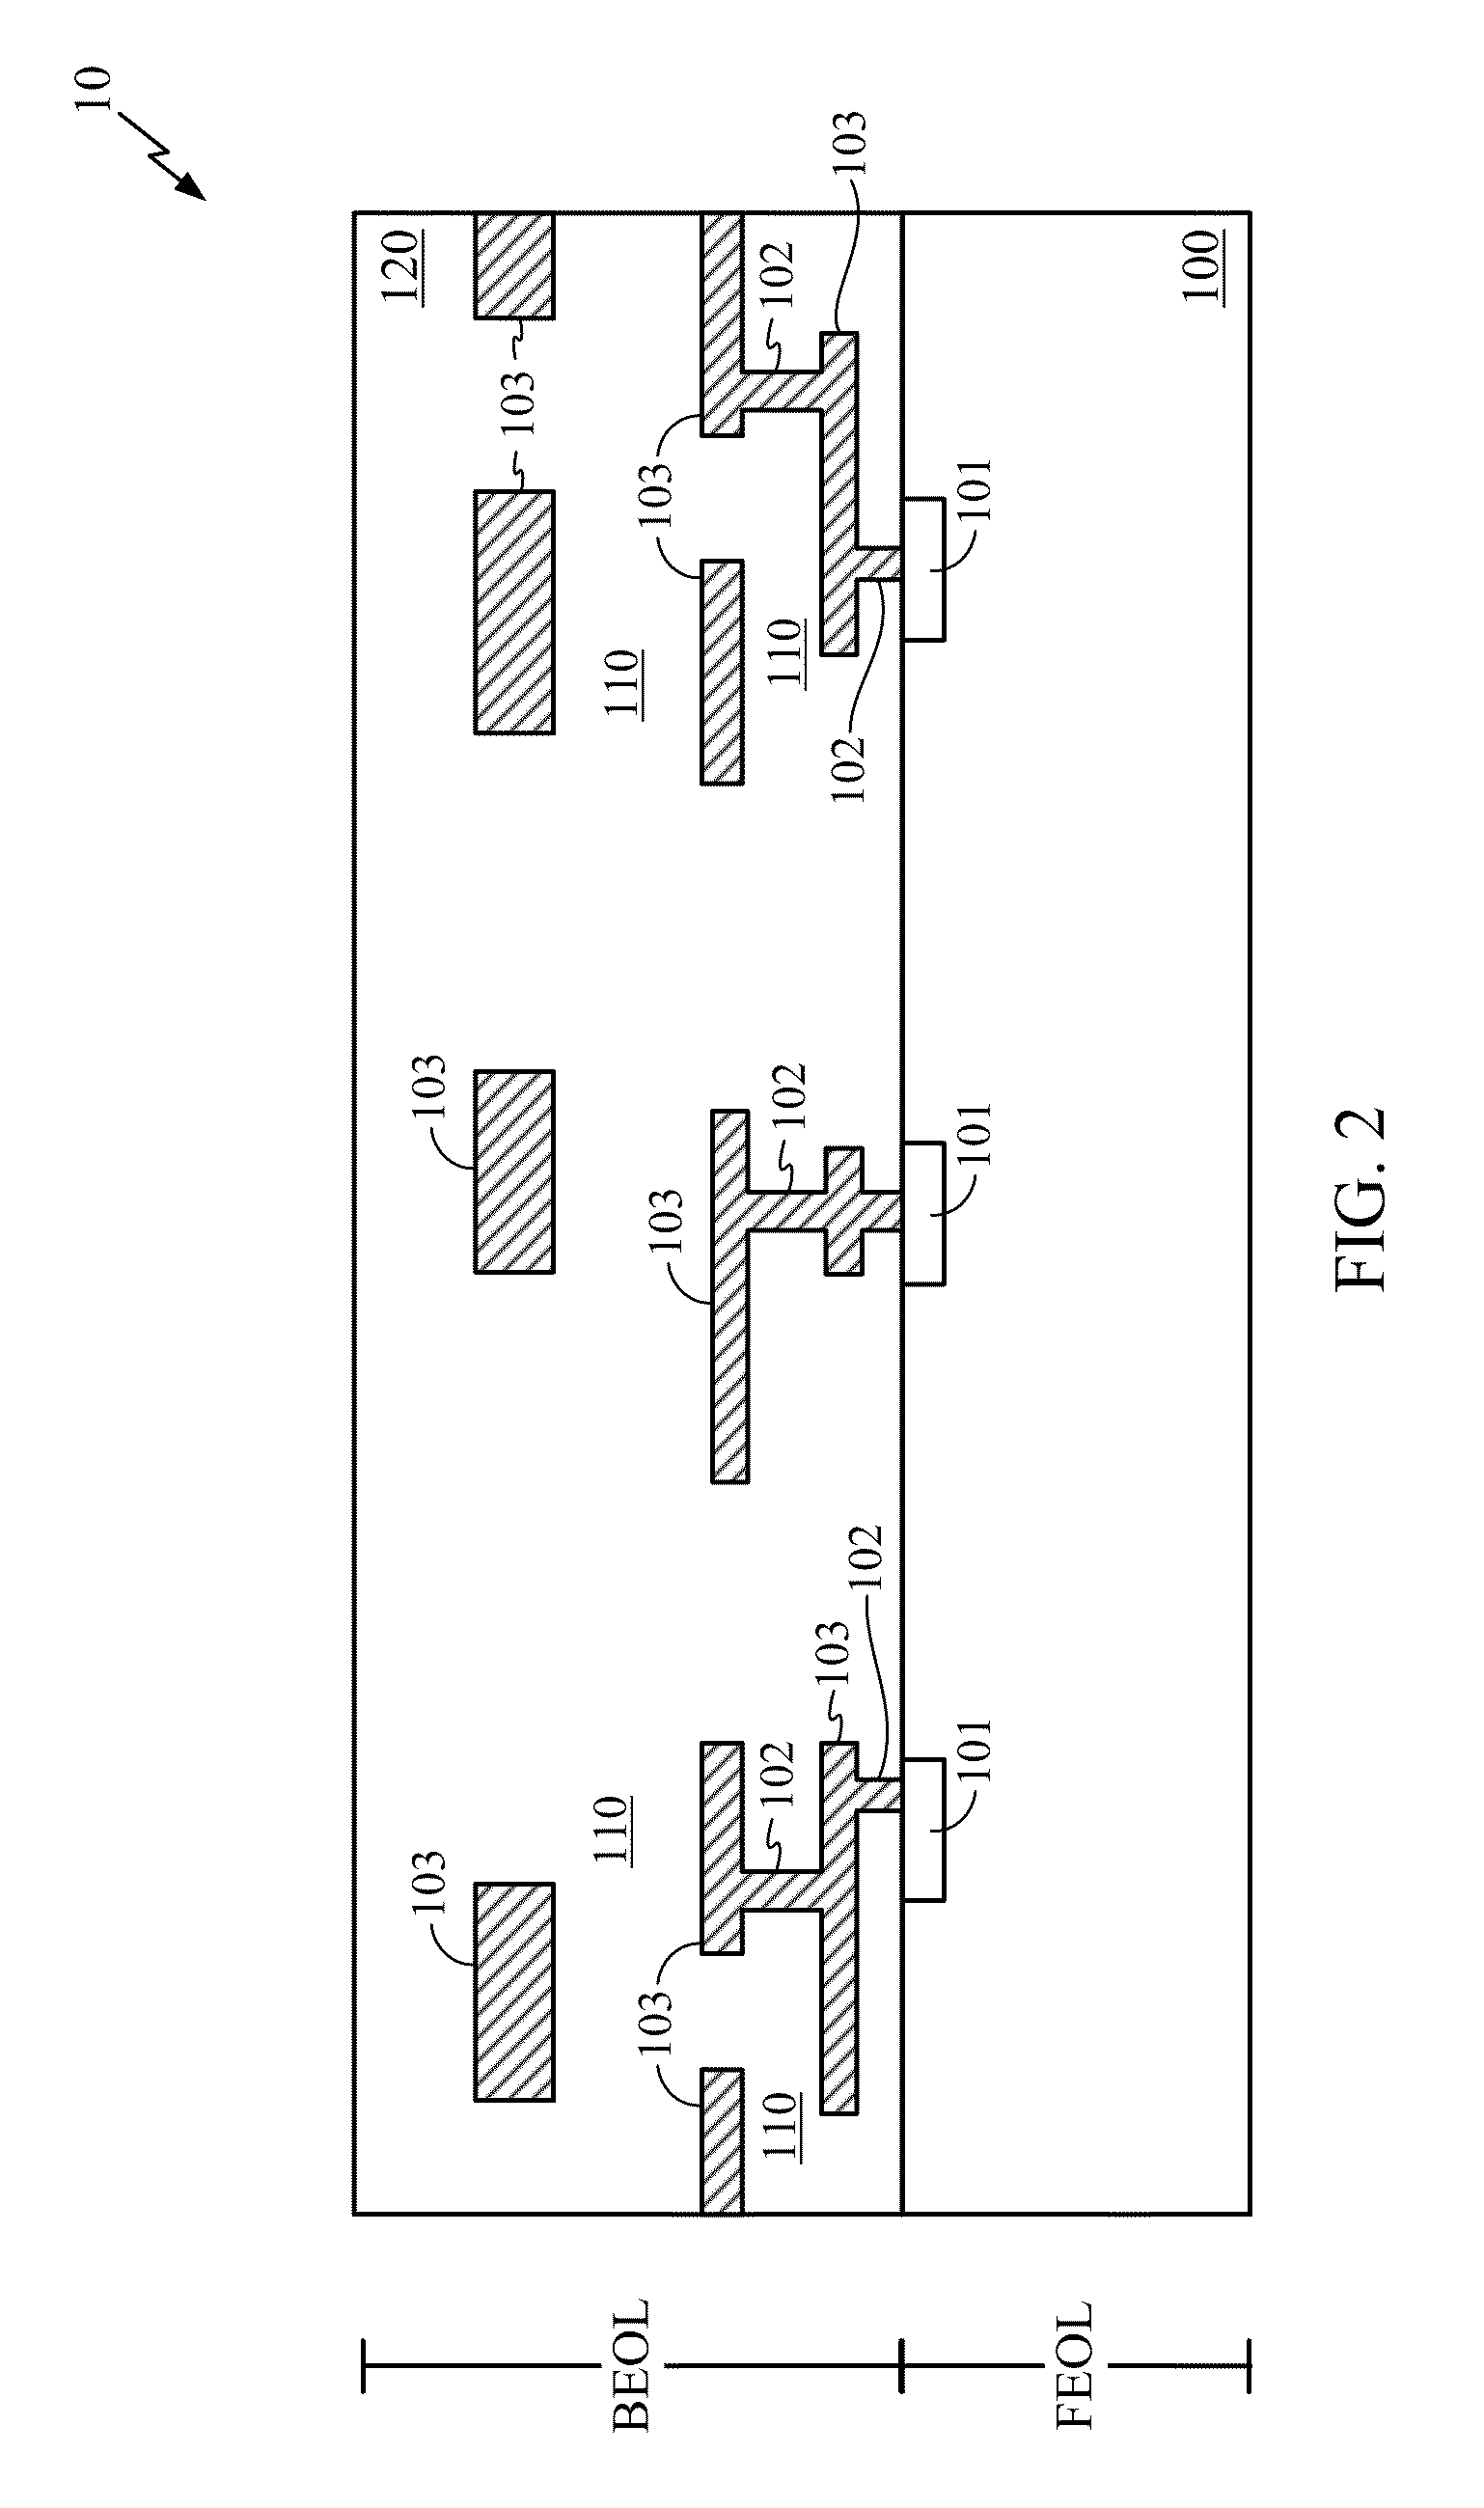 Forming radio frequency integrated circuits